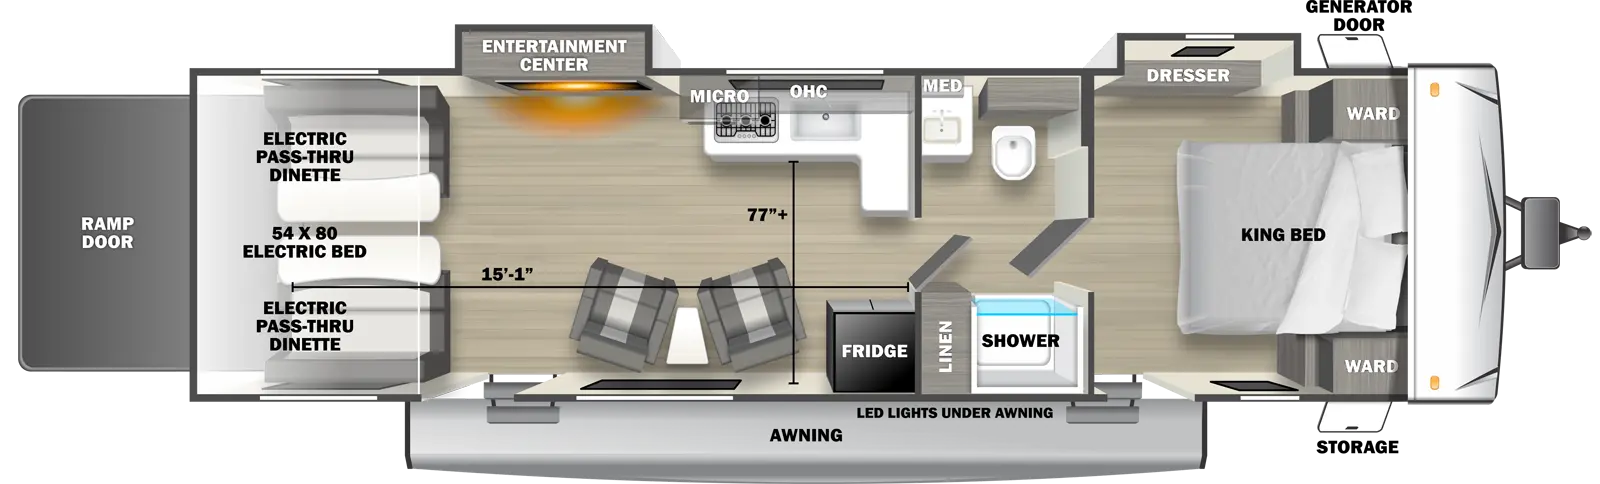 The 2600SLT travel trailer has 2 slide outs on the off-door side, 2 entry doors and 1 rear ramp door. Exterior features include an awning with LED lights over both entry doors, front door side storage and front off-door side generator door. Interior layout from front to back includes: front bedroom with foot-facing King bed, shelf over the bed, front corner wardrobes, off-door side slideout holding a dresser and door side entry door to outside; pass-through bathroom with toilet, medicine cabinet and sink on the off-door side and shower and linen storage on the door side; off-door side L-shaped kitchen countertop with overhead microwave and cabinets, stovetop and sink; door side refrigerator; 2 door side recliners with end table; off-door side slideout holding an entertainment center; door side entry door to outside; and rear 54 x 80 electric bed over electric pass-through dinette. Cargo length from rear of unit to kitchen wall is 15 ft. 1 in. Cargo width from kitchen countertop to door side wall is 77 inches.